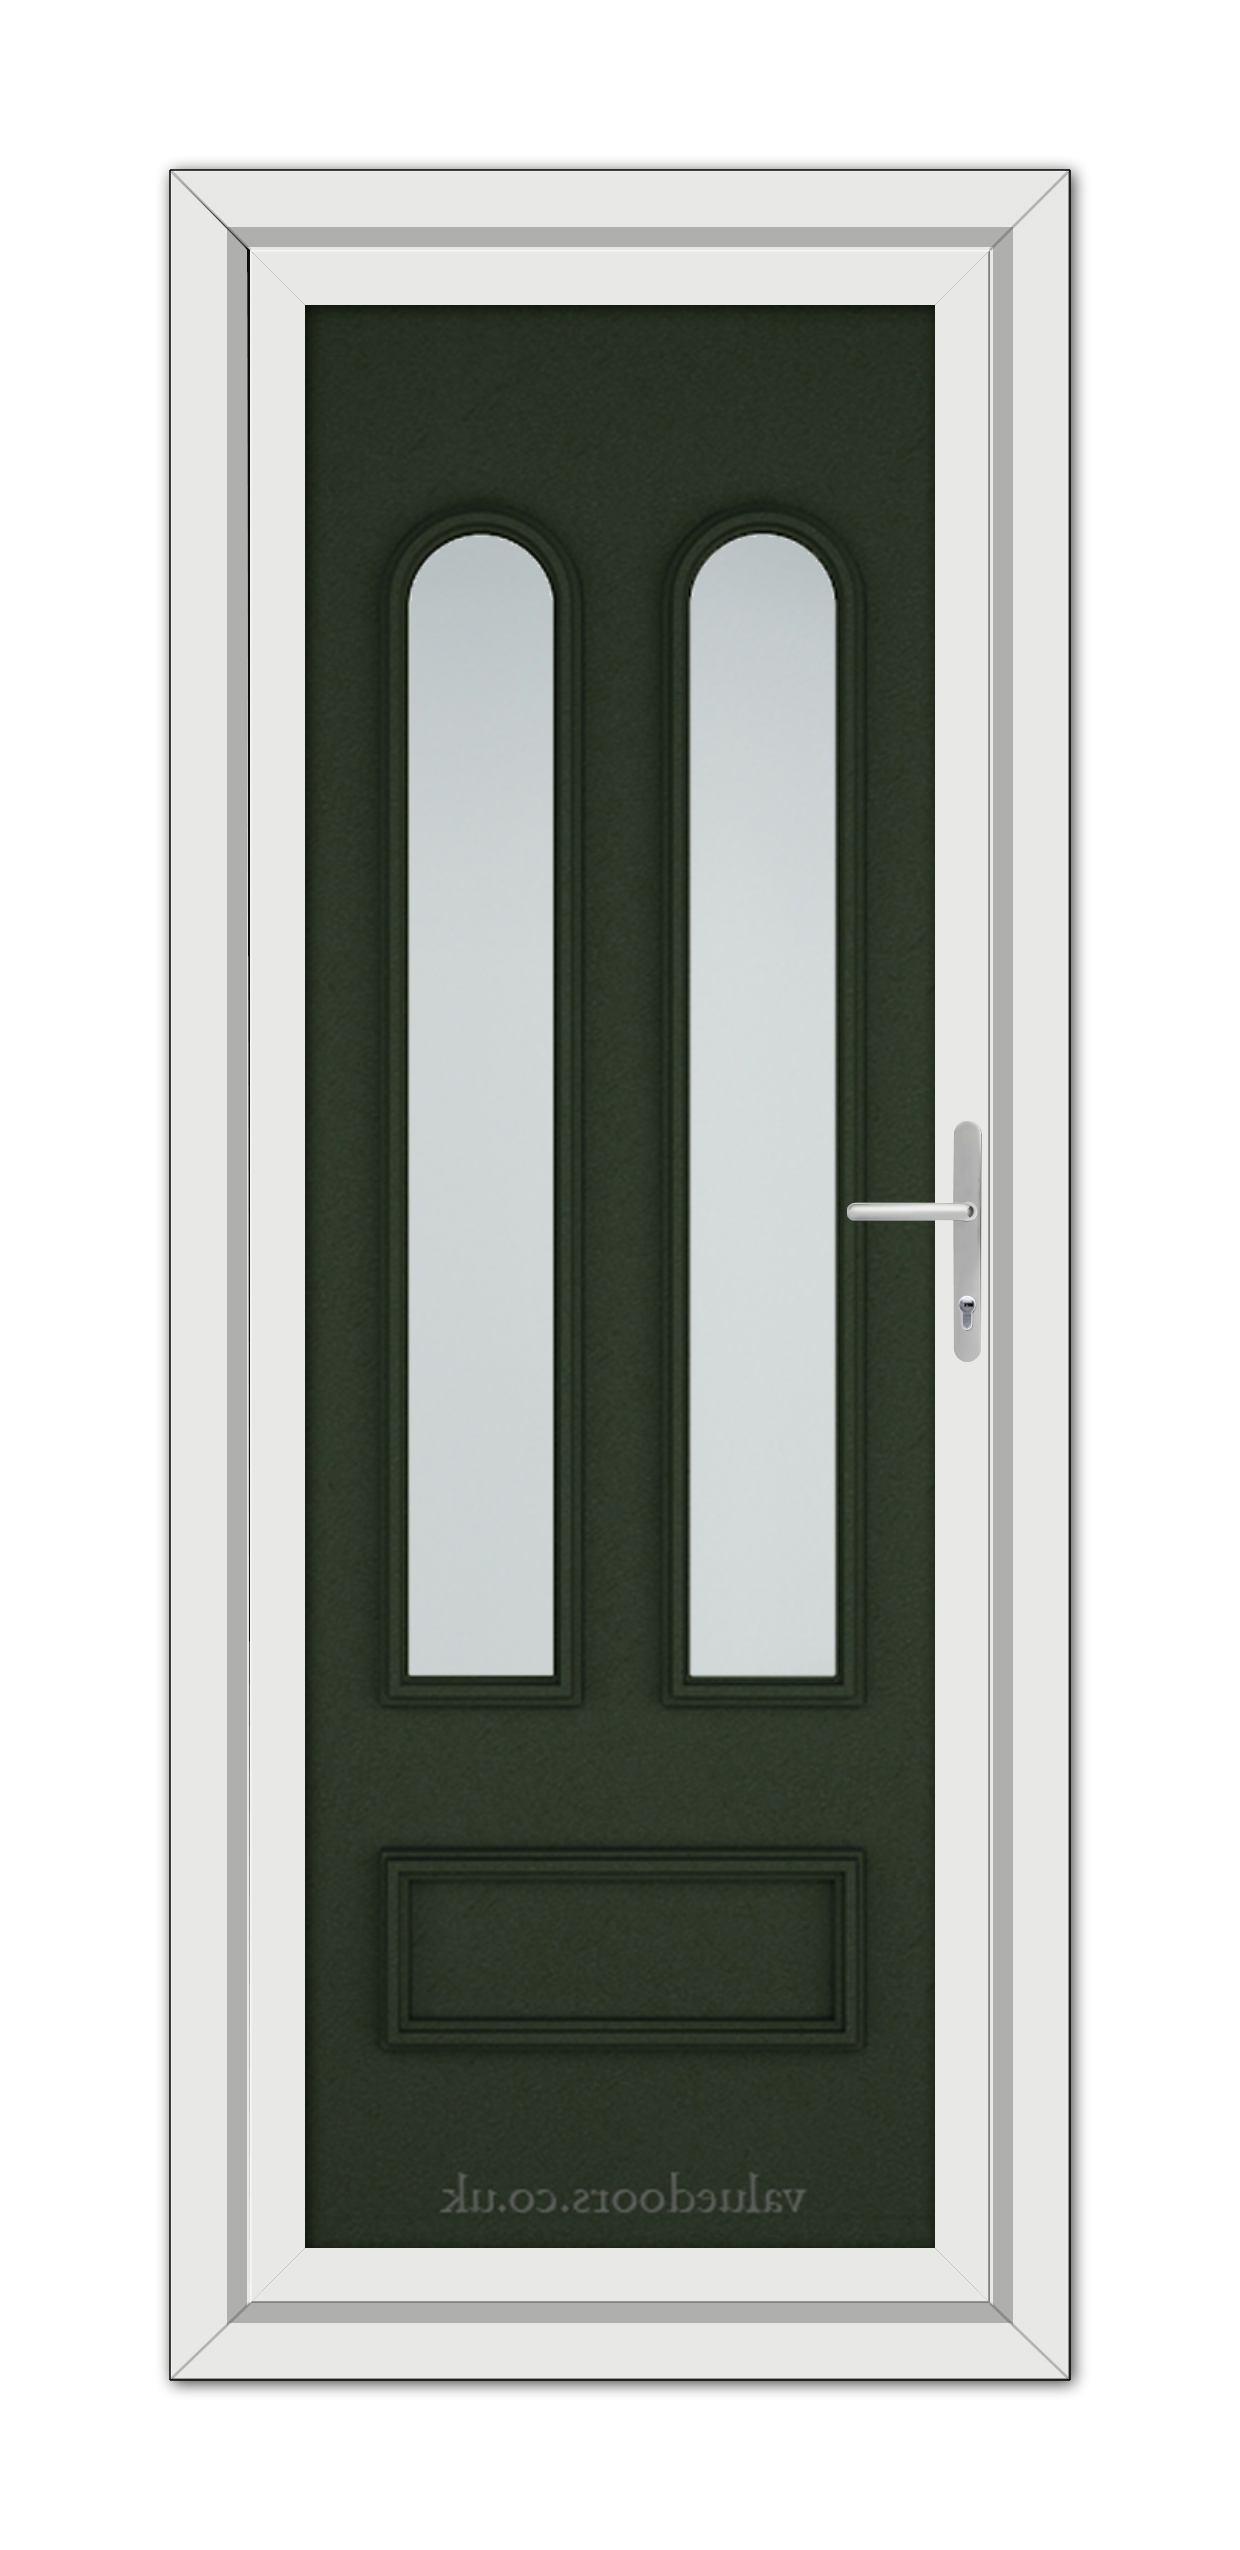 A Green Madrid uPVC Door with glass panels.